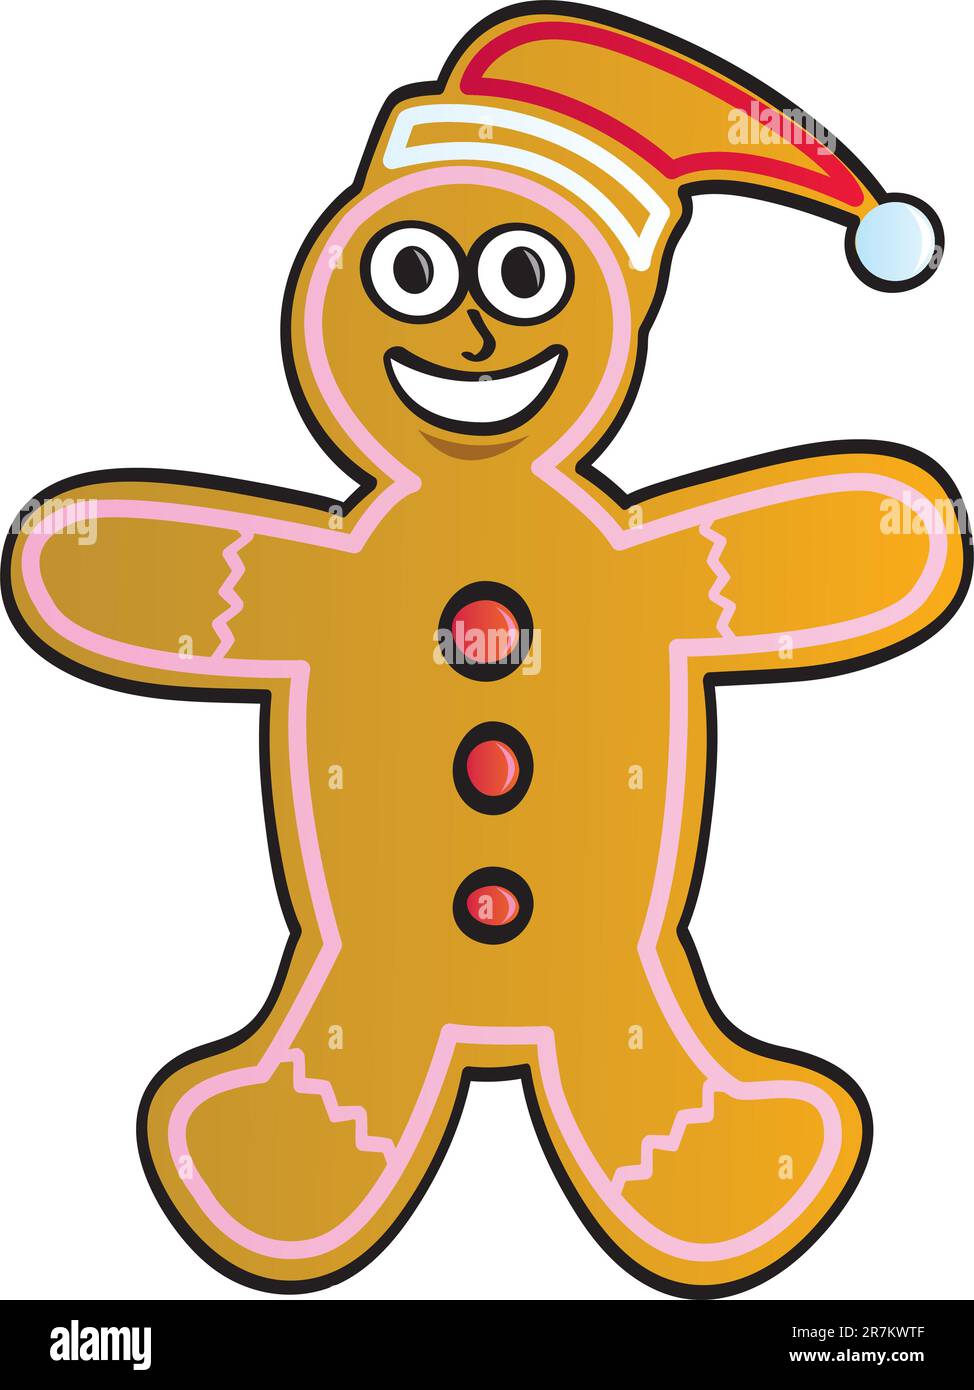 A cartoon gingerbread man with a big smile and santa hat. Stock Vector